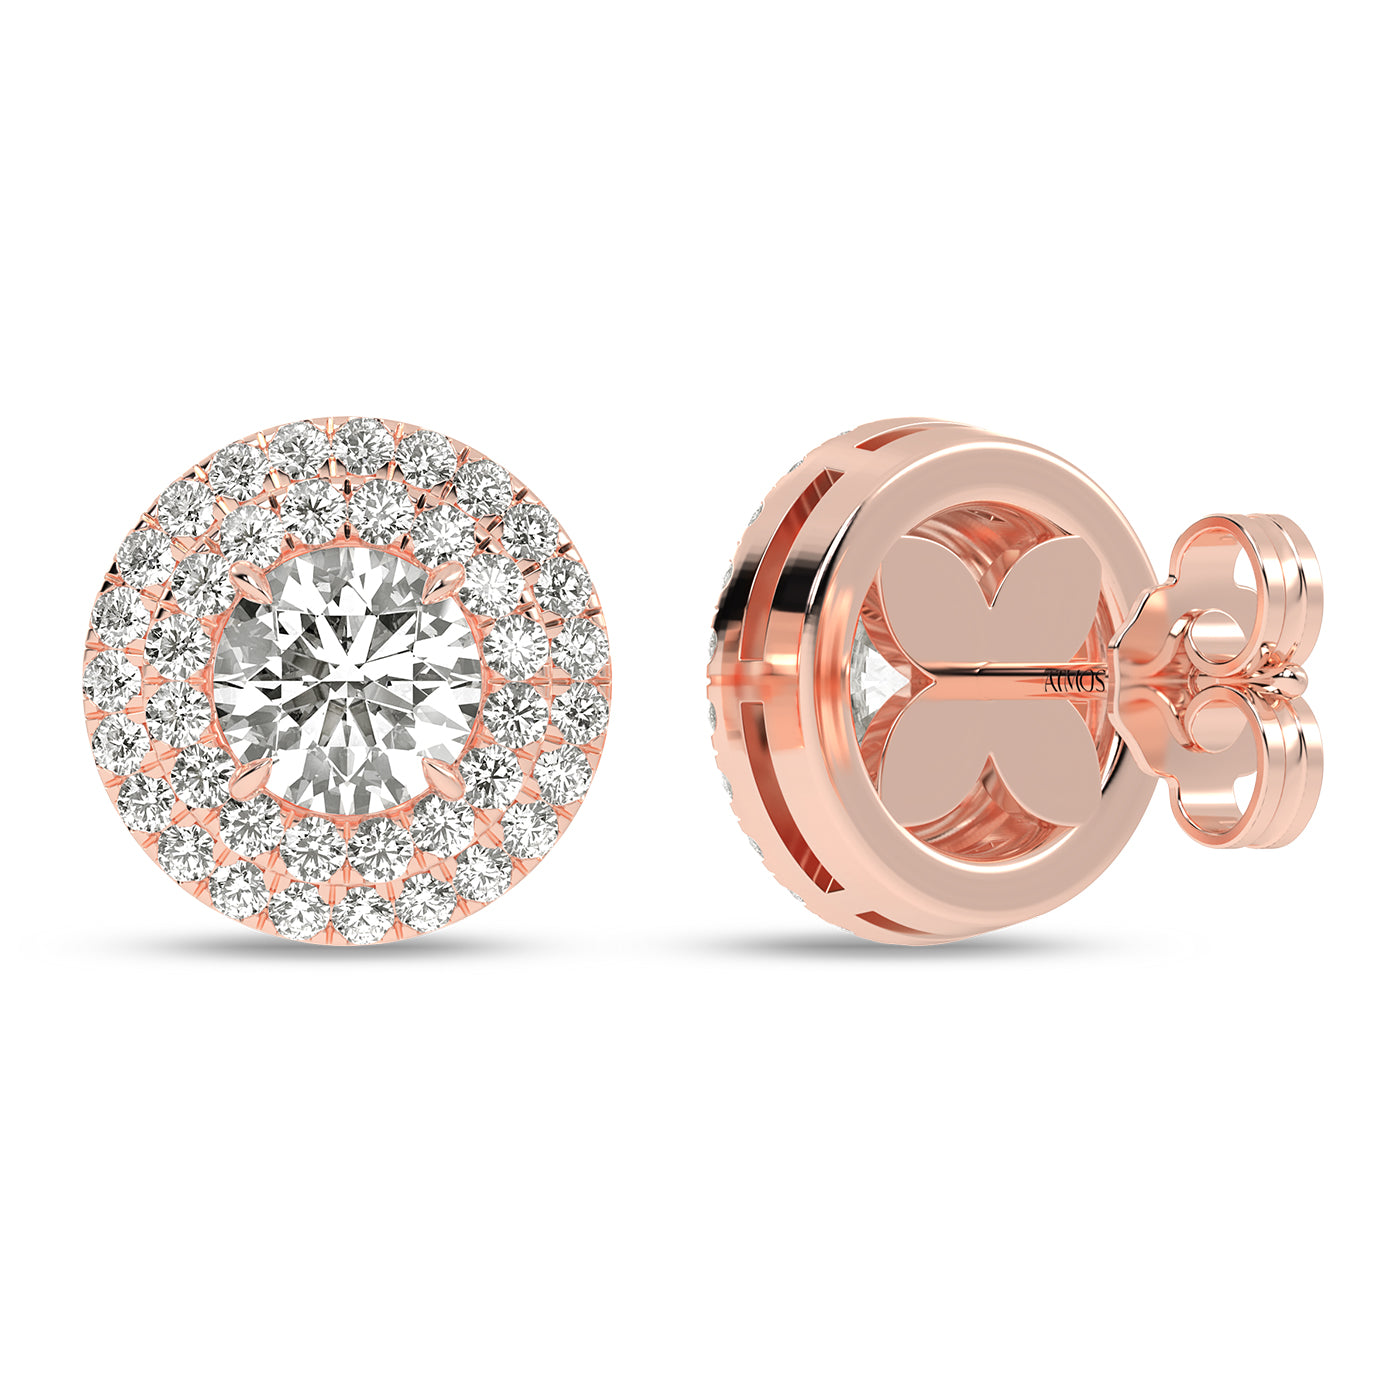 Quaint Double Halo Atmos Round Studs_Product angle _2 - 3